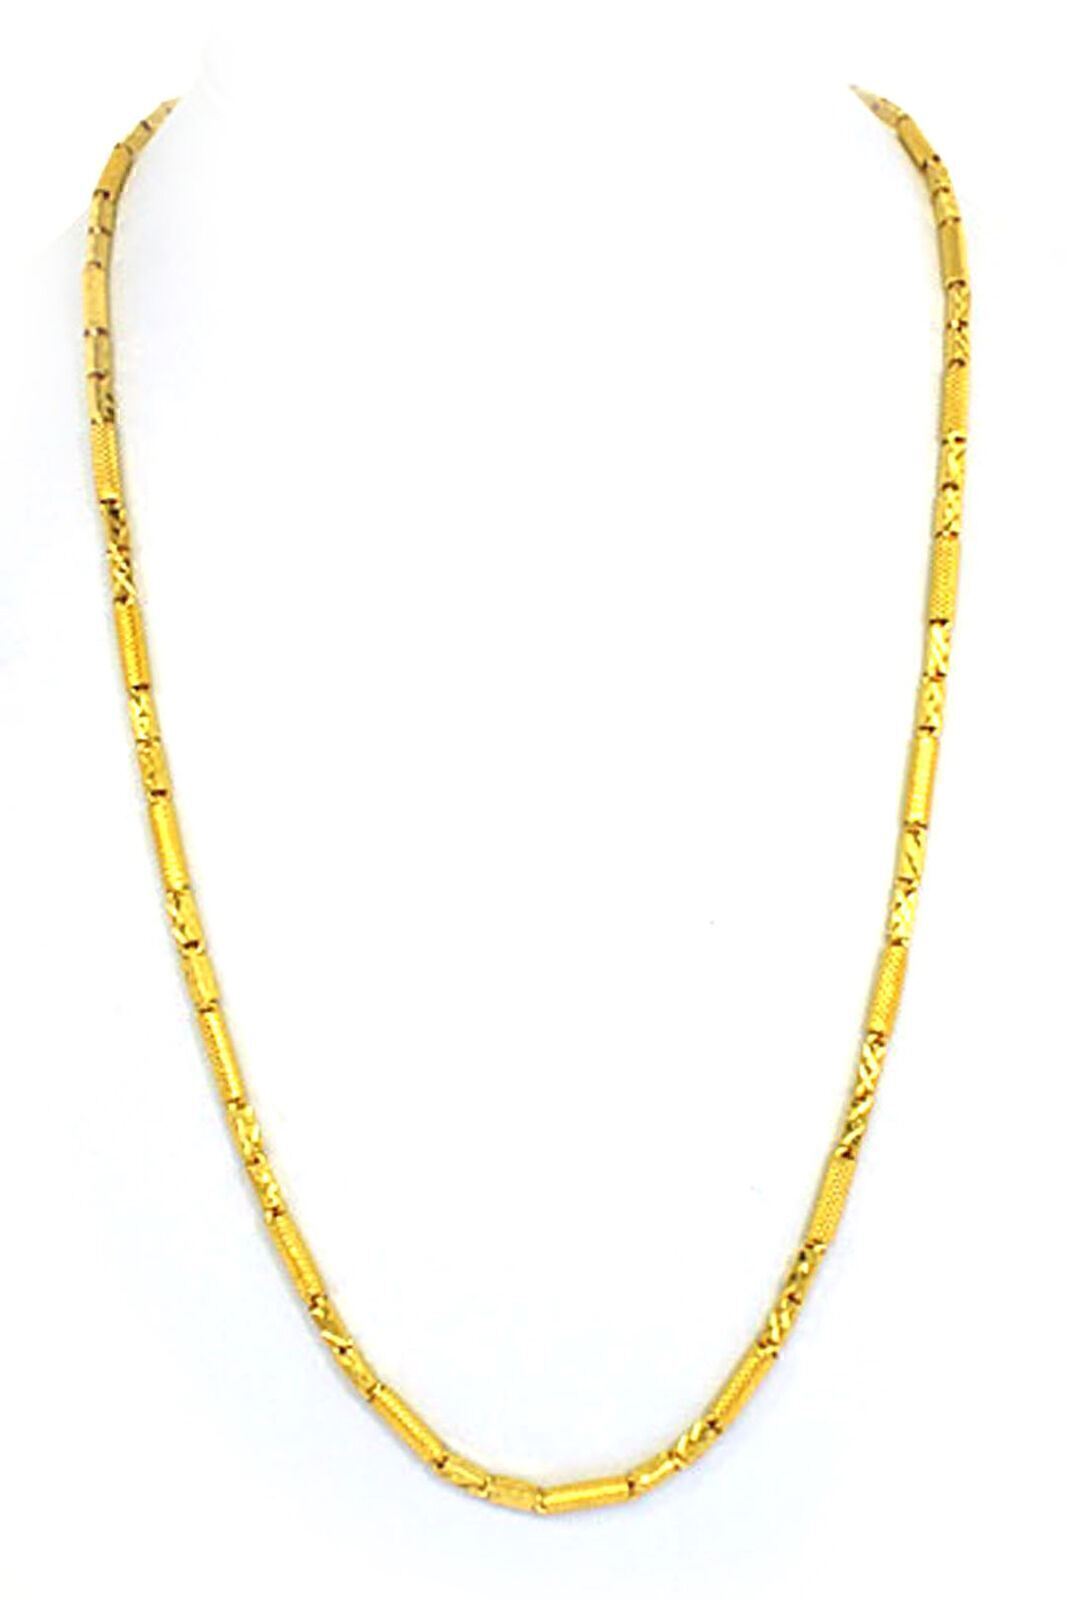 22k Gold Tube Link Chain Necklace 23" Long